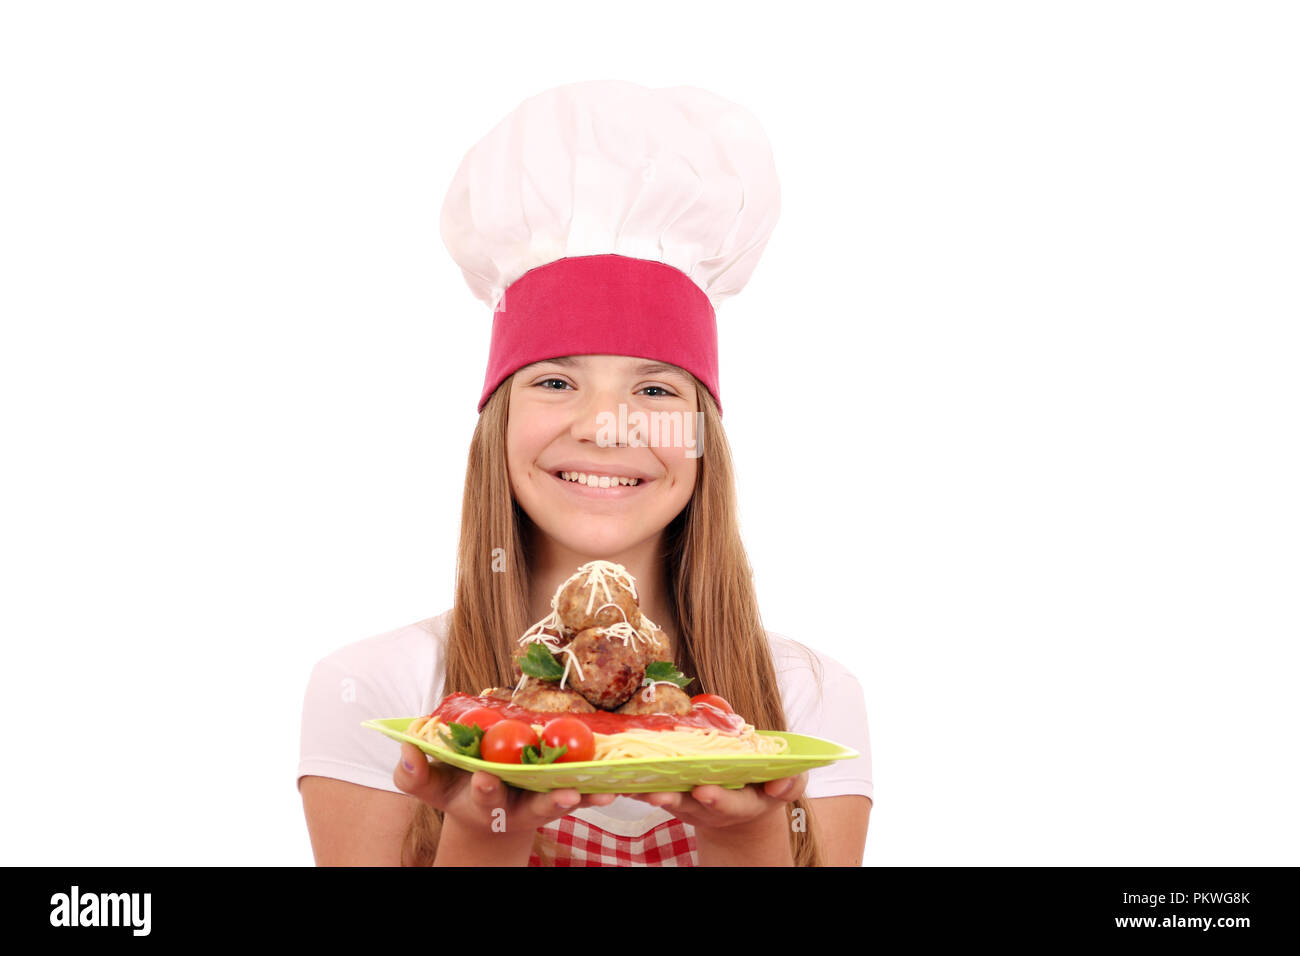 happy little girl cook with spaghetti and meatballs Stock Photo